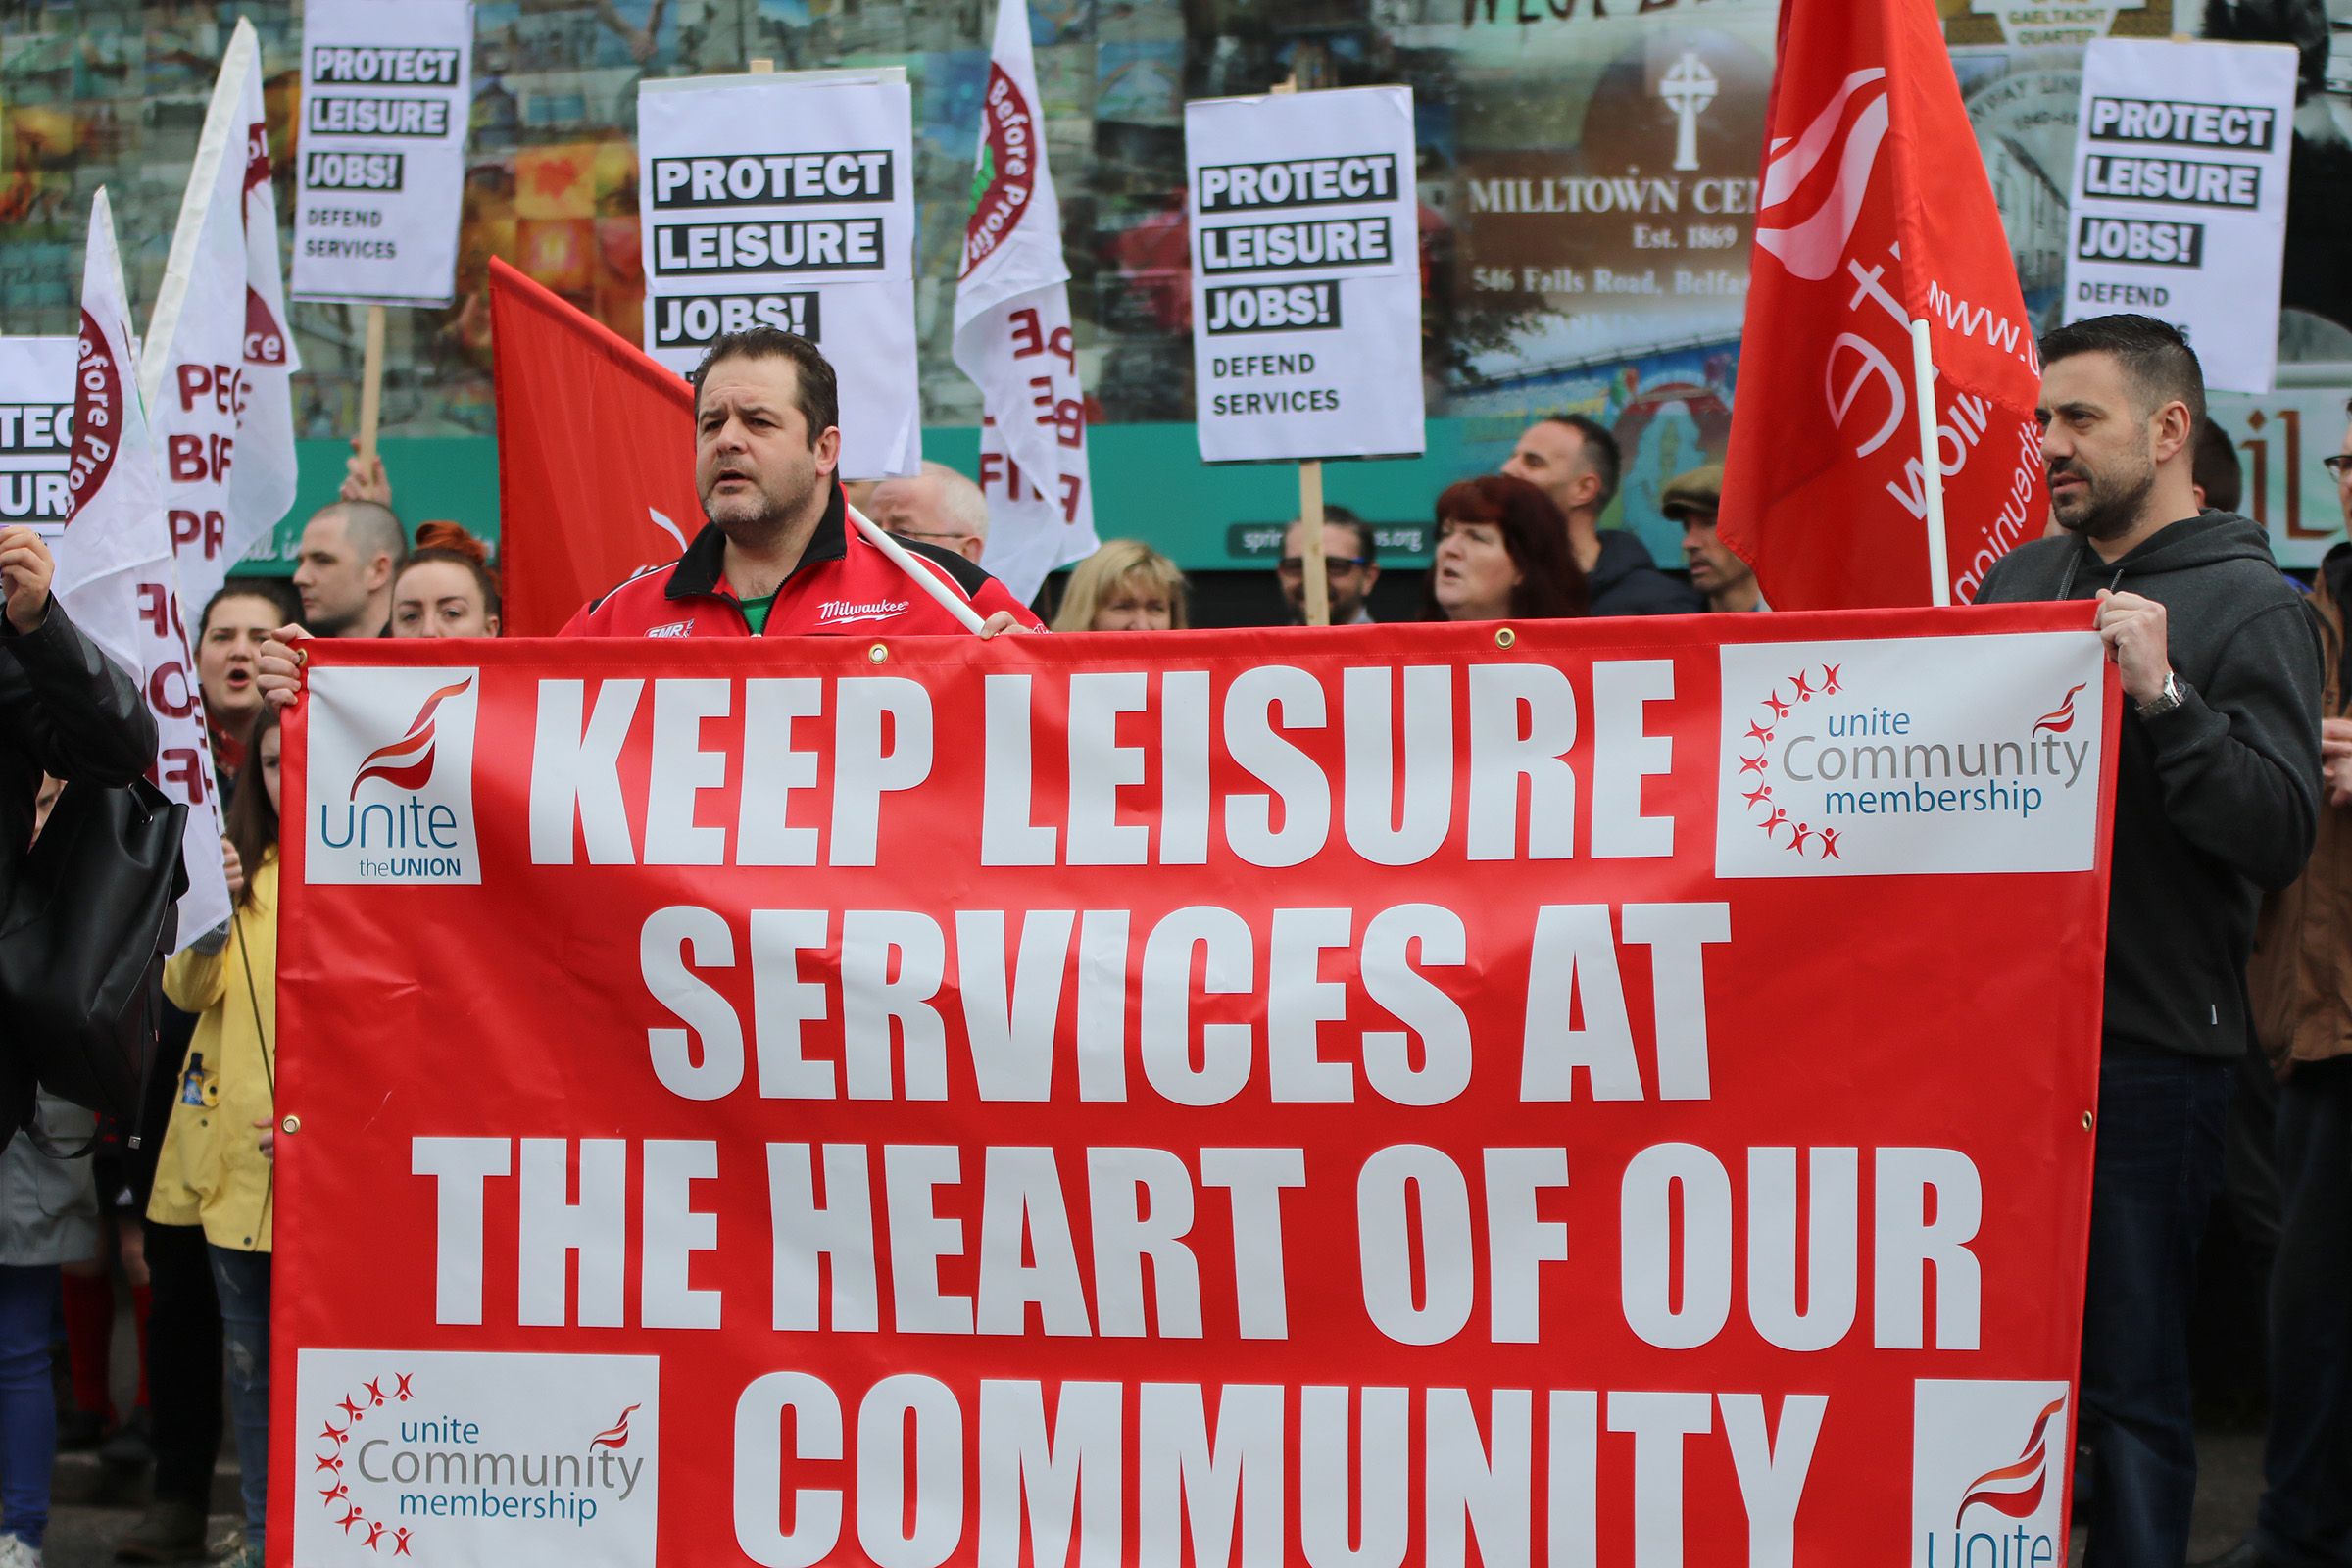 Council scraps group set up to scrutinise leisure services